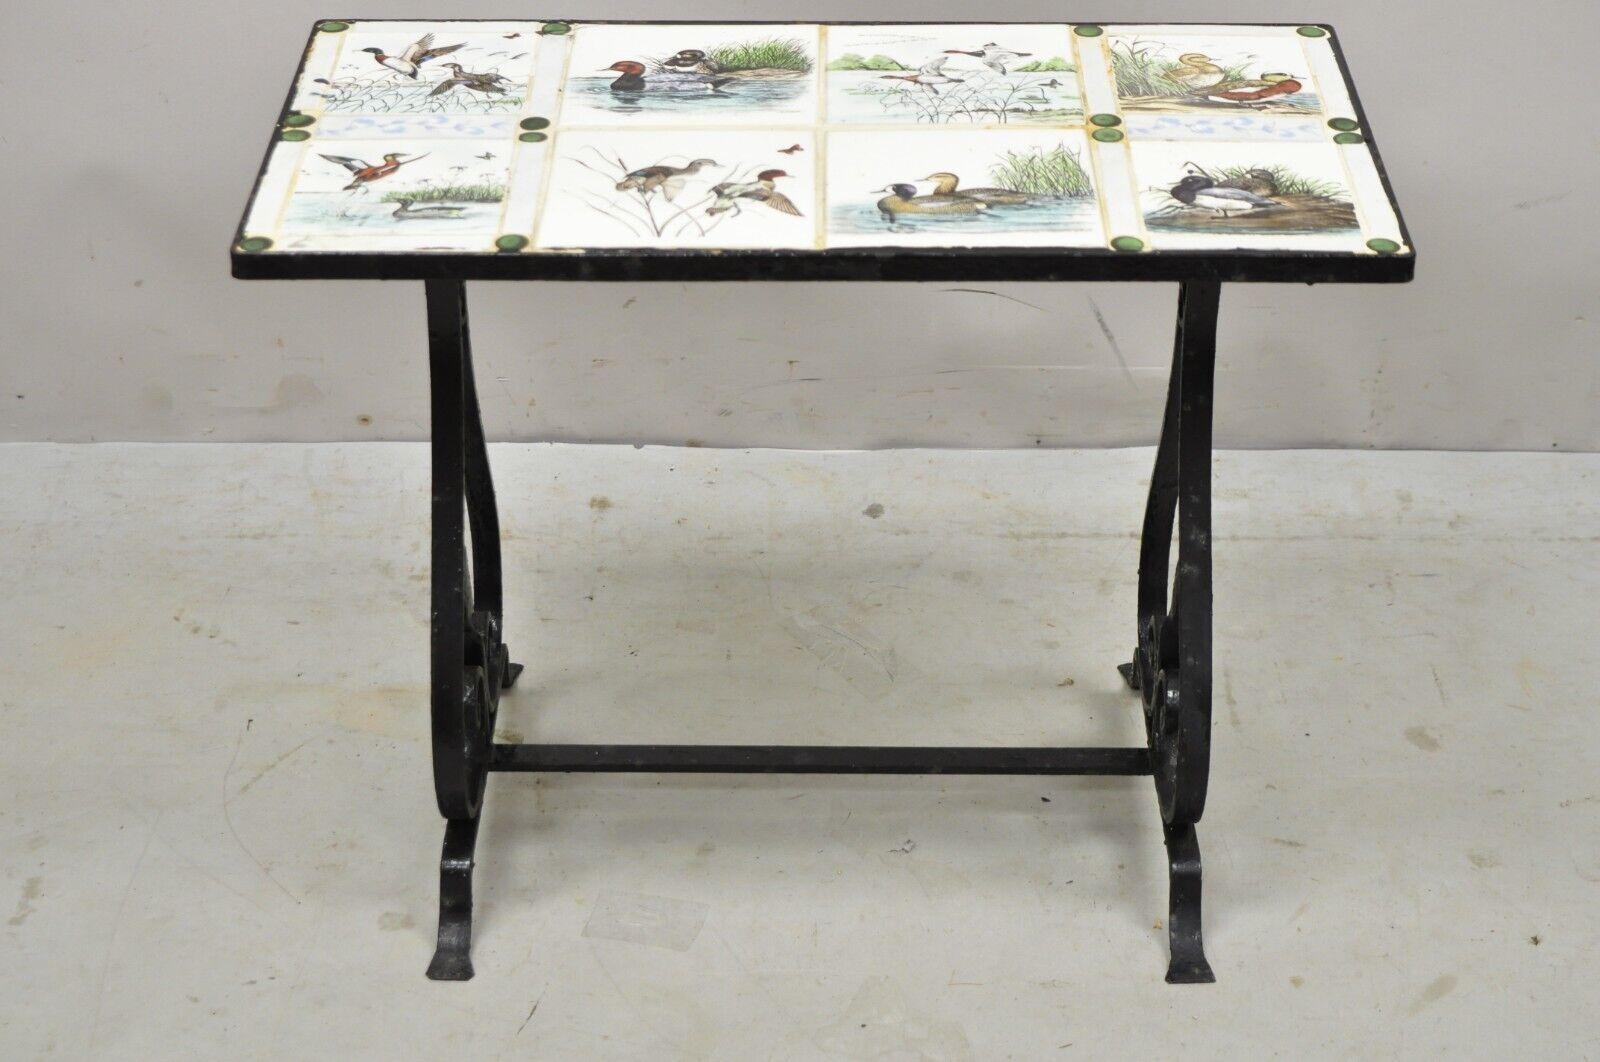 Antique Art Nouveau Wrought Iron Small Side Table with Duck Geese Tile Top In Good Condition For Sale In Philadelphia, PA